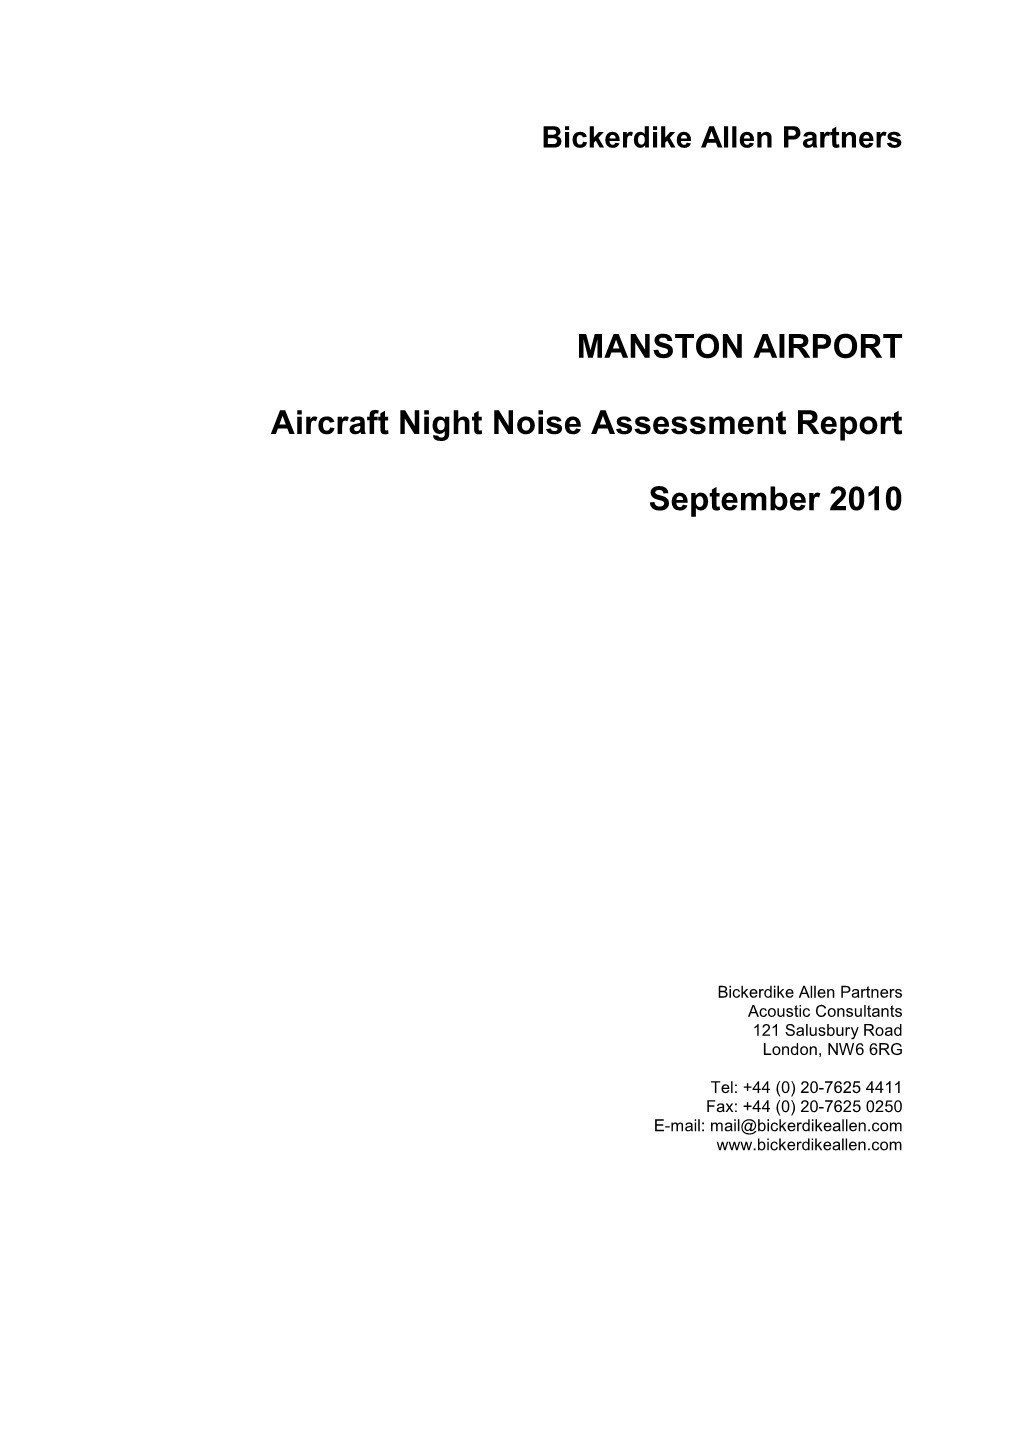 MANSTON AIRPORT Aircraft Night Noise Assessment Report